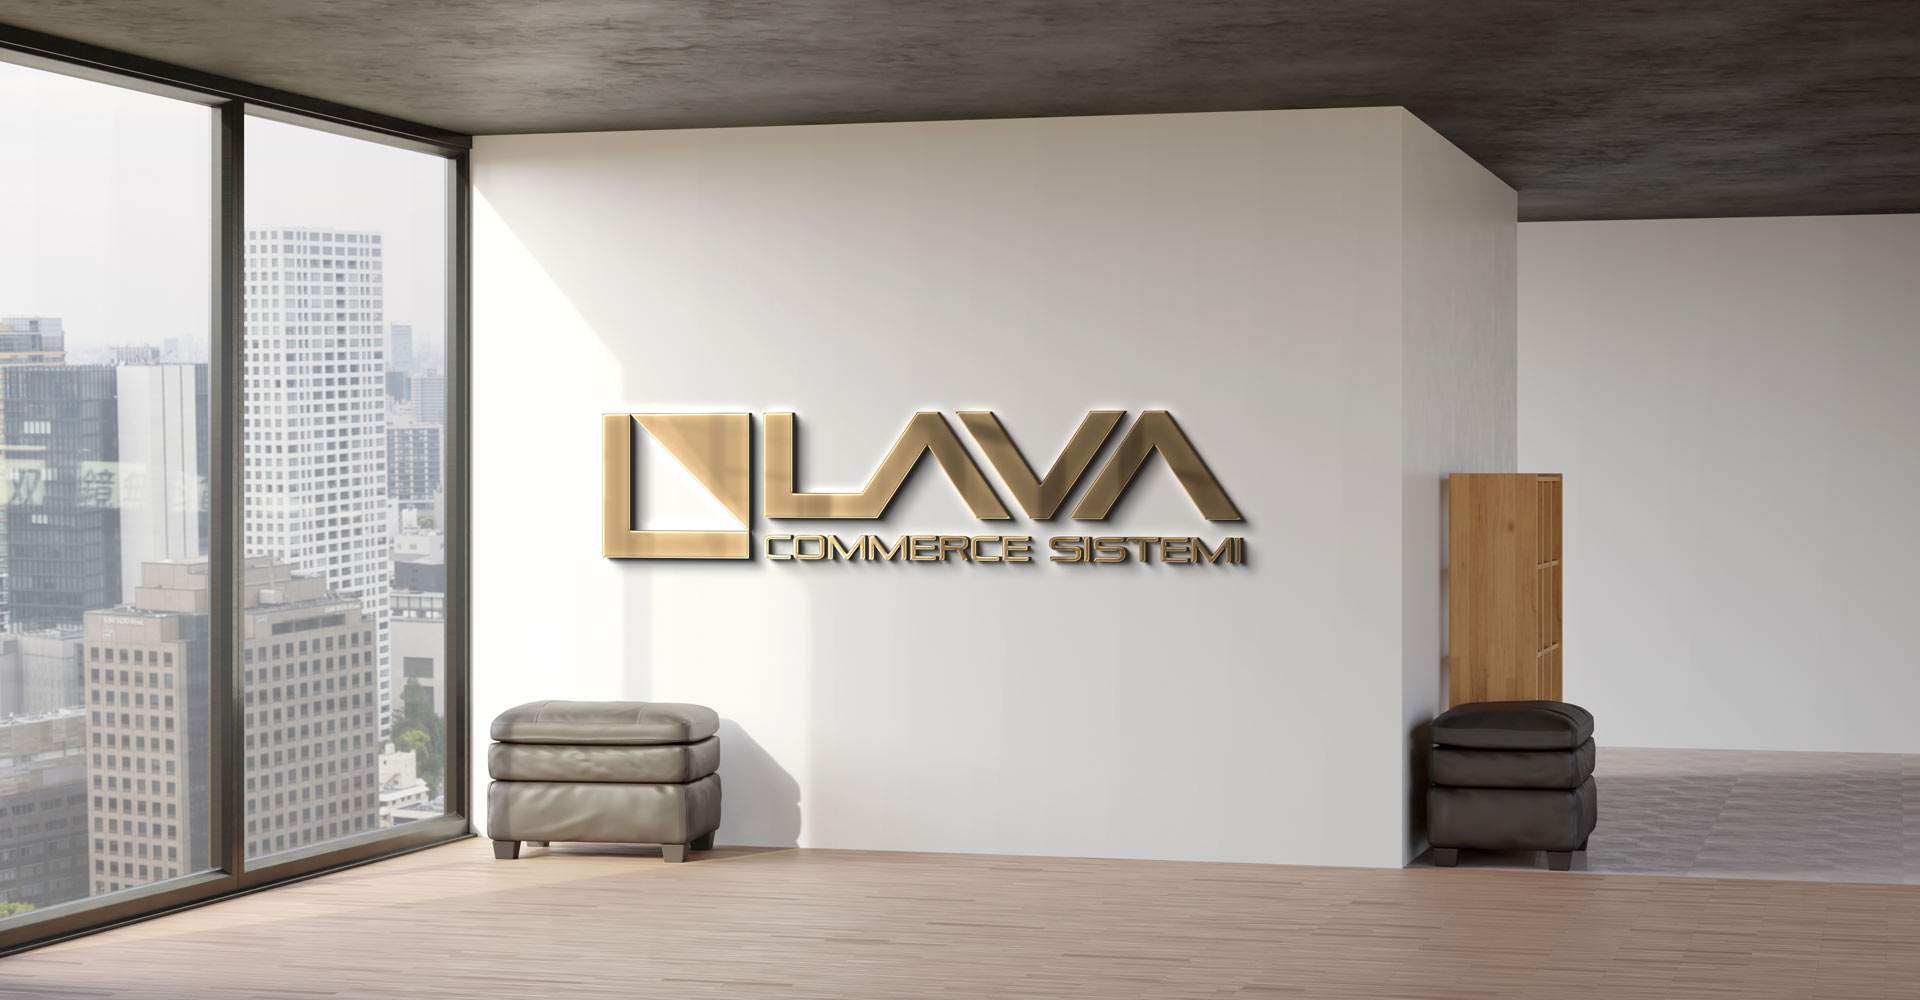 Pallet racks LAVA systems | Pallet systems 